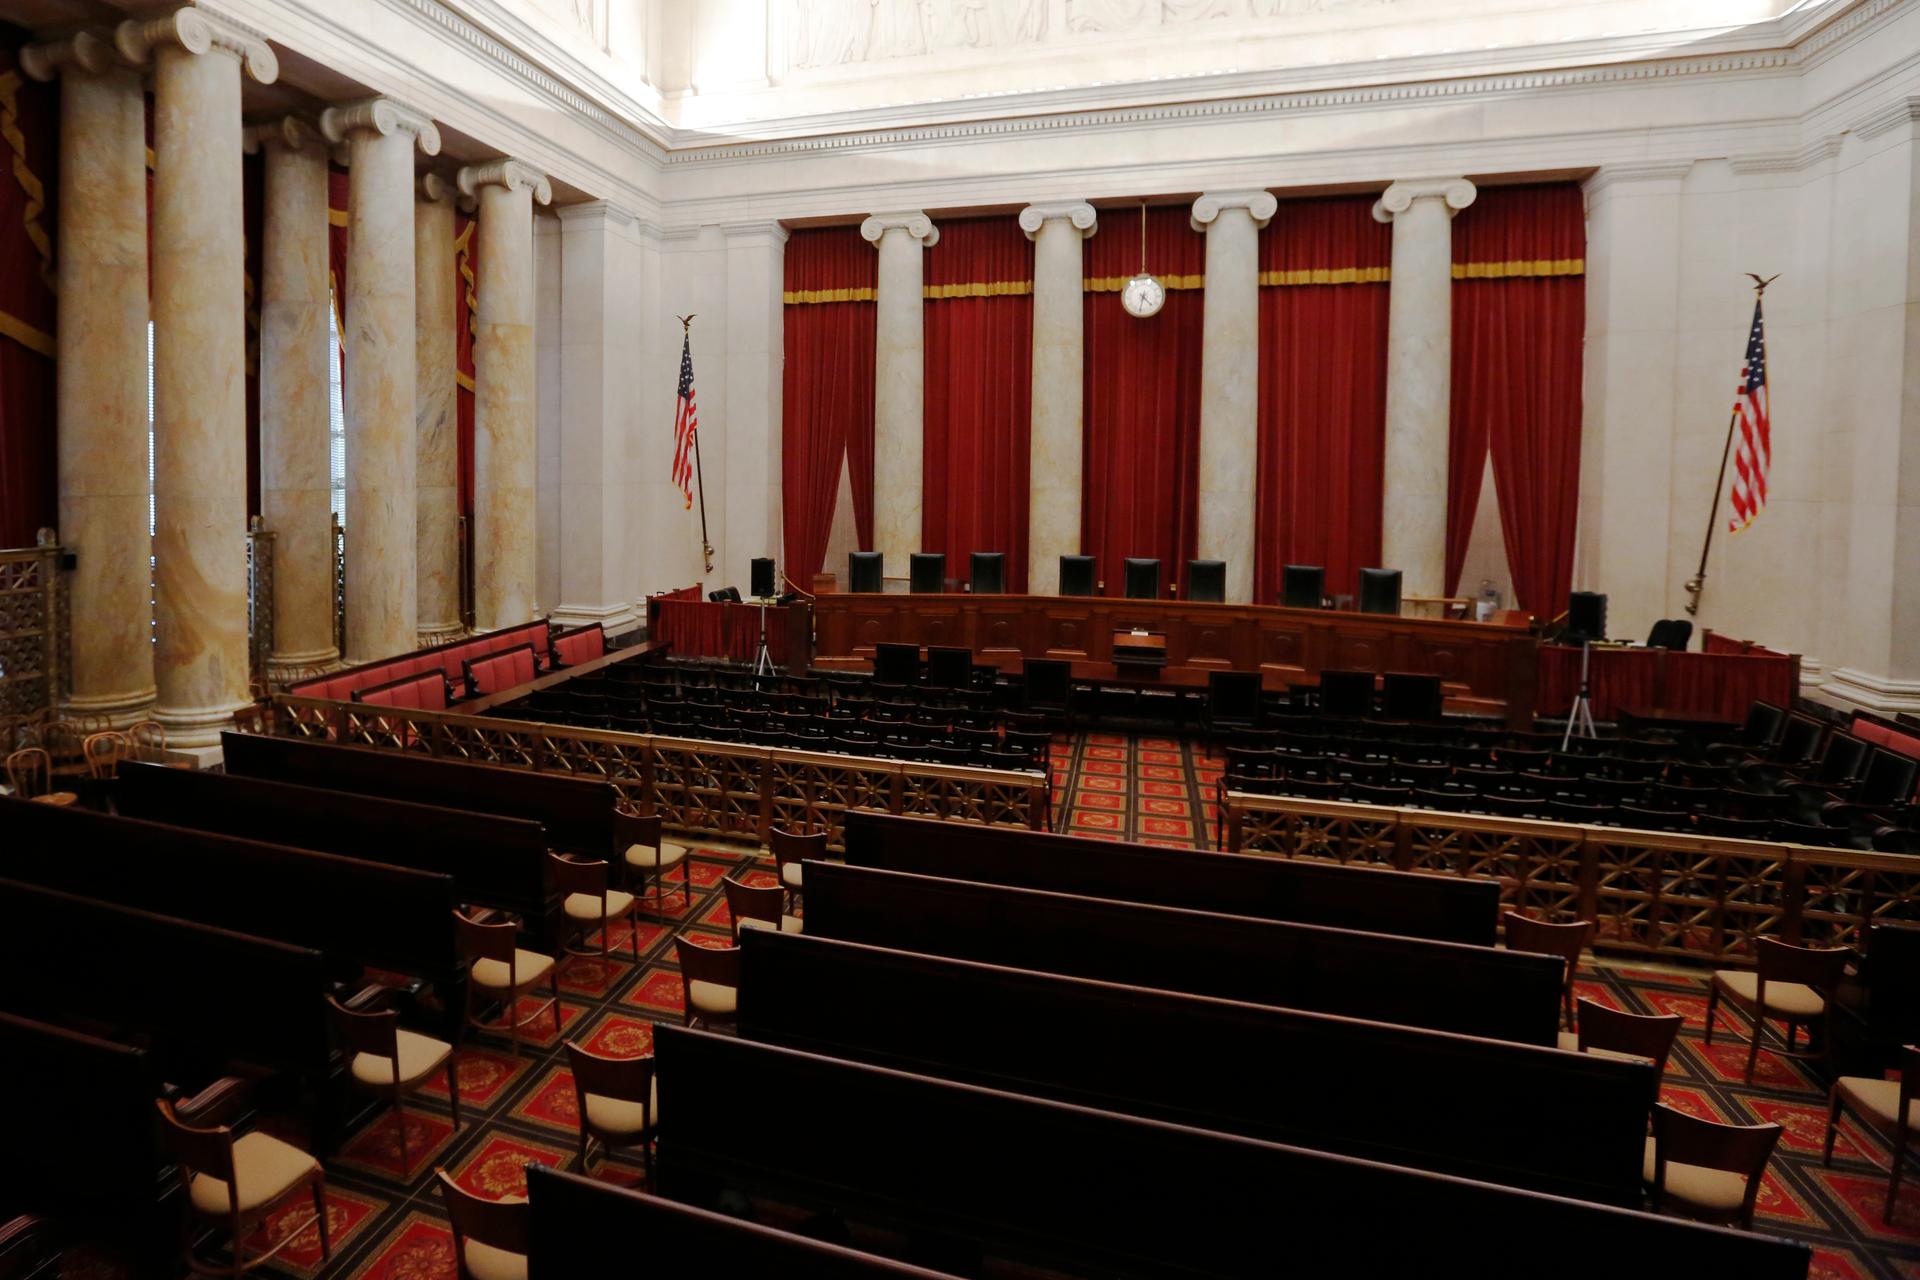 The courtroom of the US Supreme Court